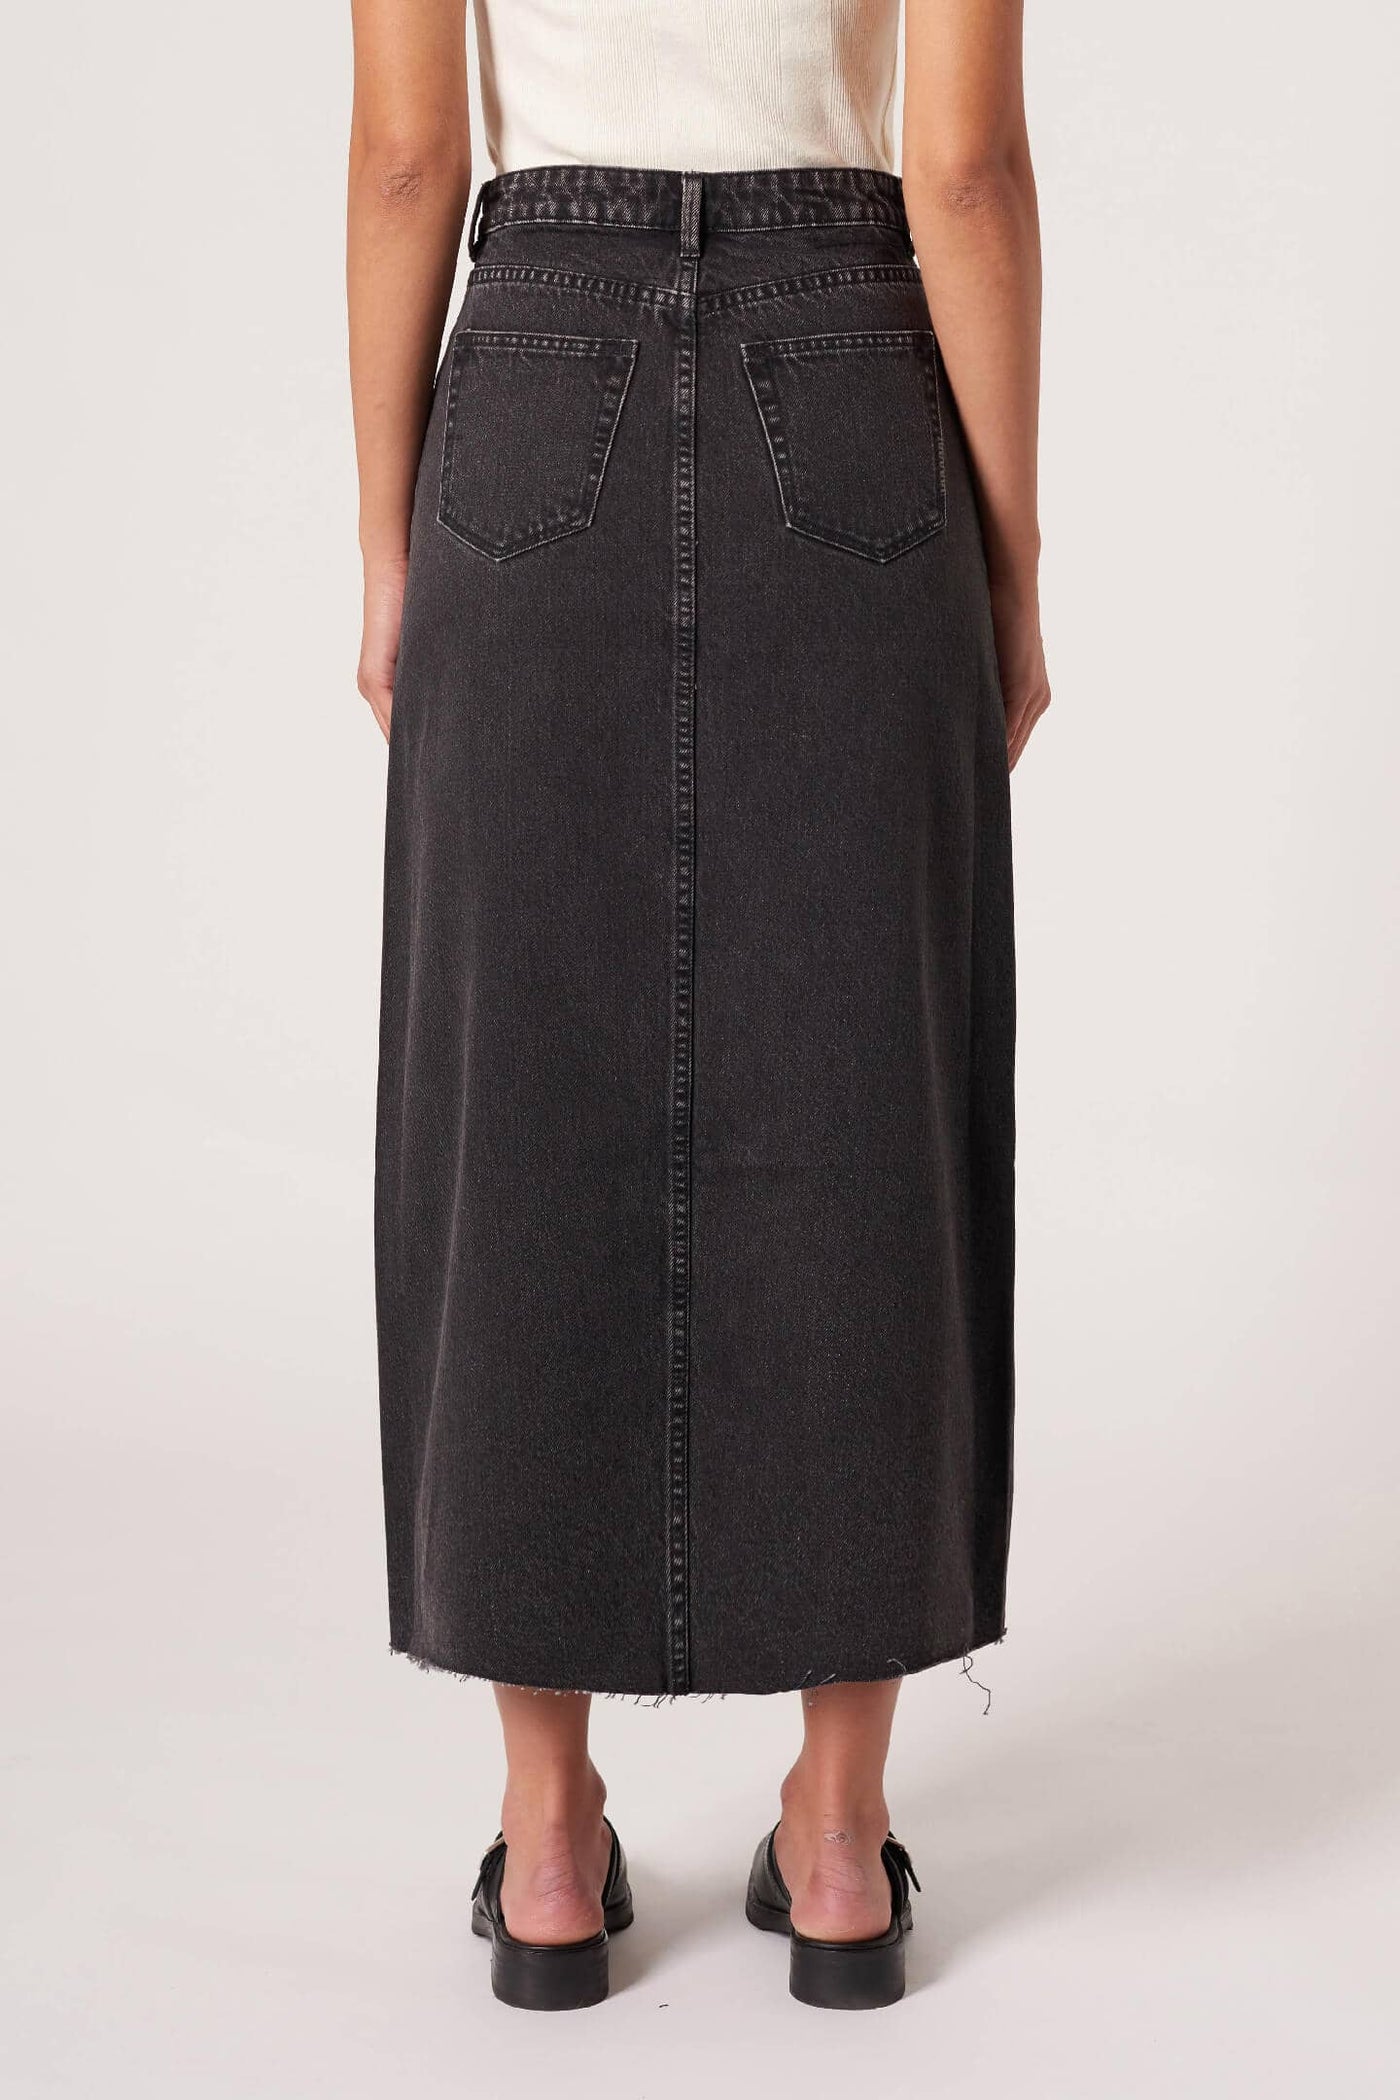 The Neuw Darcy skirt is our new favourite denim piece. This trans-seasonal style will take you from one season to the next. Team with a tank or tee in summer or with a blazer and sneakers for a winter fit.  Classic high waist denim skirt Centre front hem split Raw hem Length 100cm 100% Australia Cotton